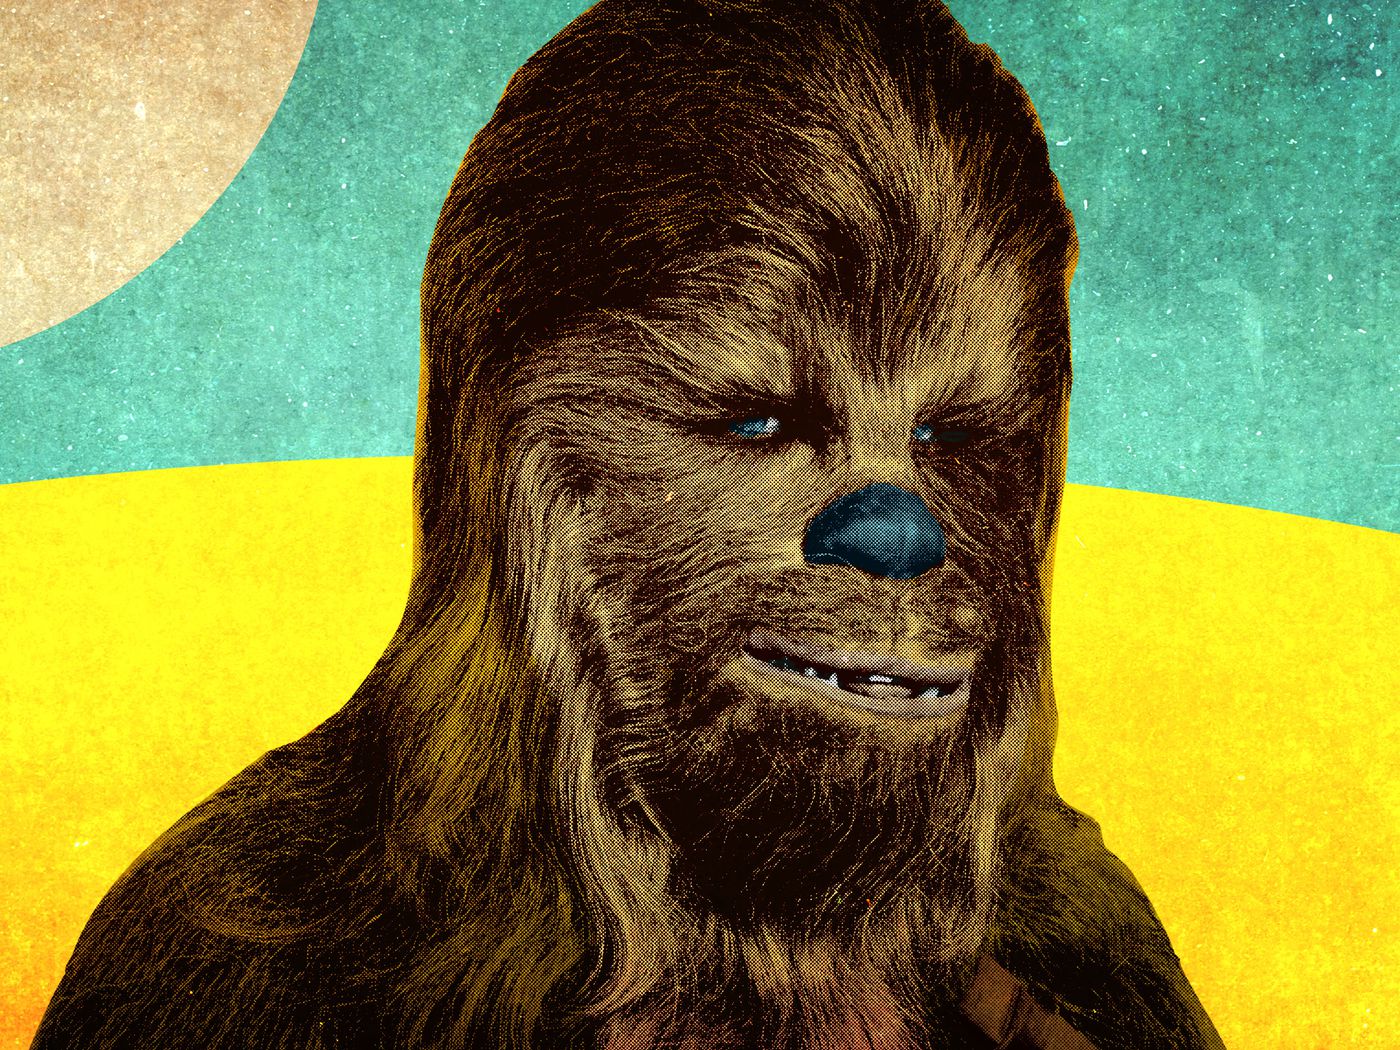 andrew sabaresa barus share pictures of chewbacca photos